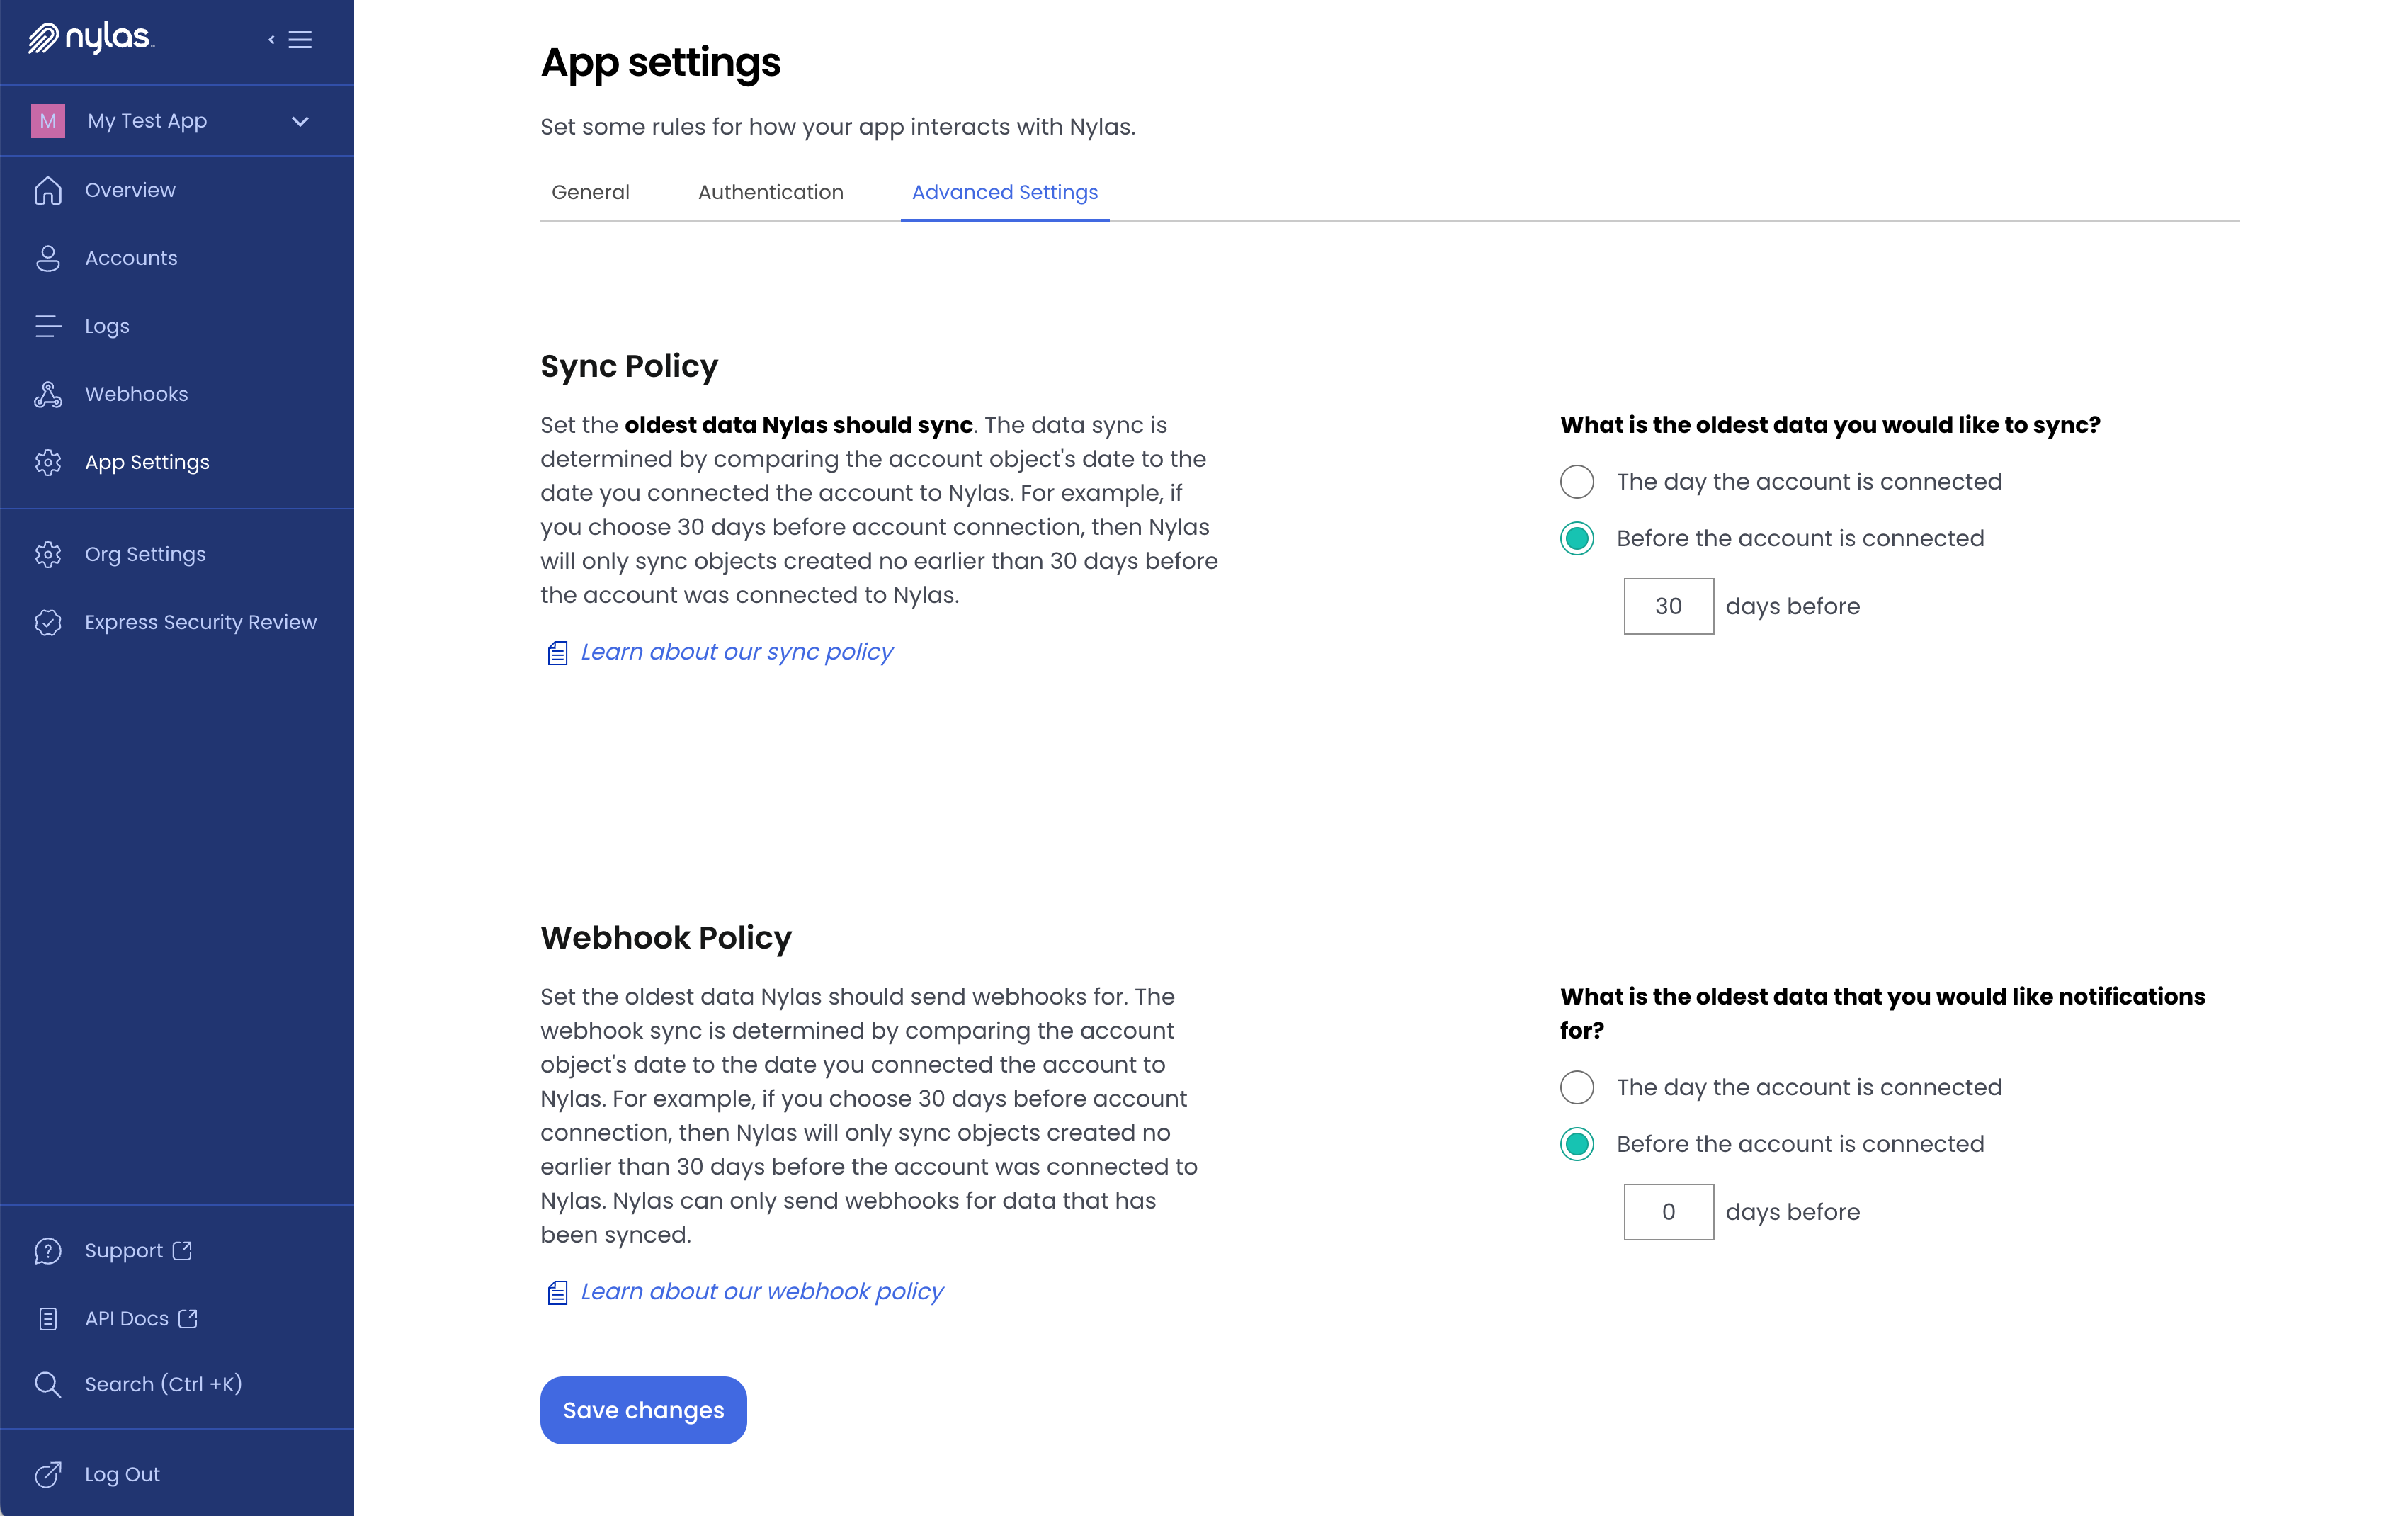 The Nylas Dashboard "App settings" page. The "Advanced settings" tab is selected, and the "Sync Policy" and "Webhook Policy" settings are shown.